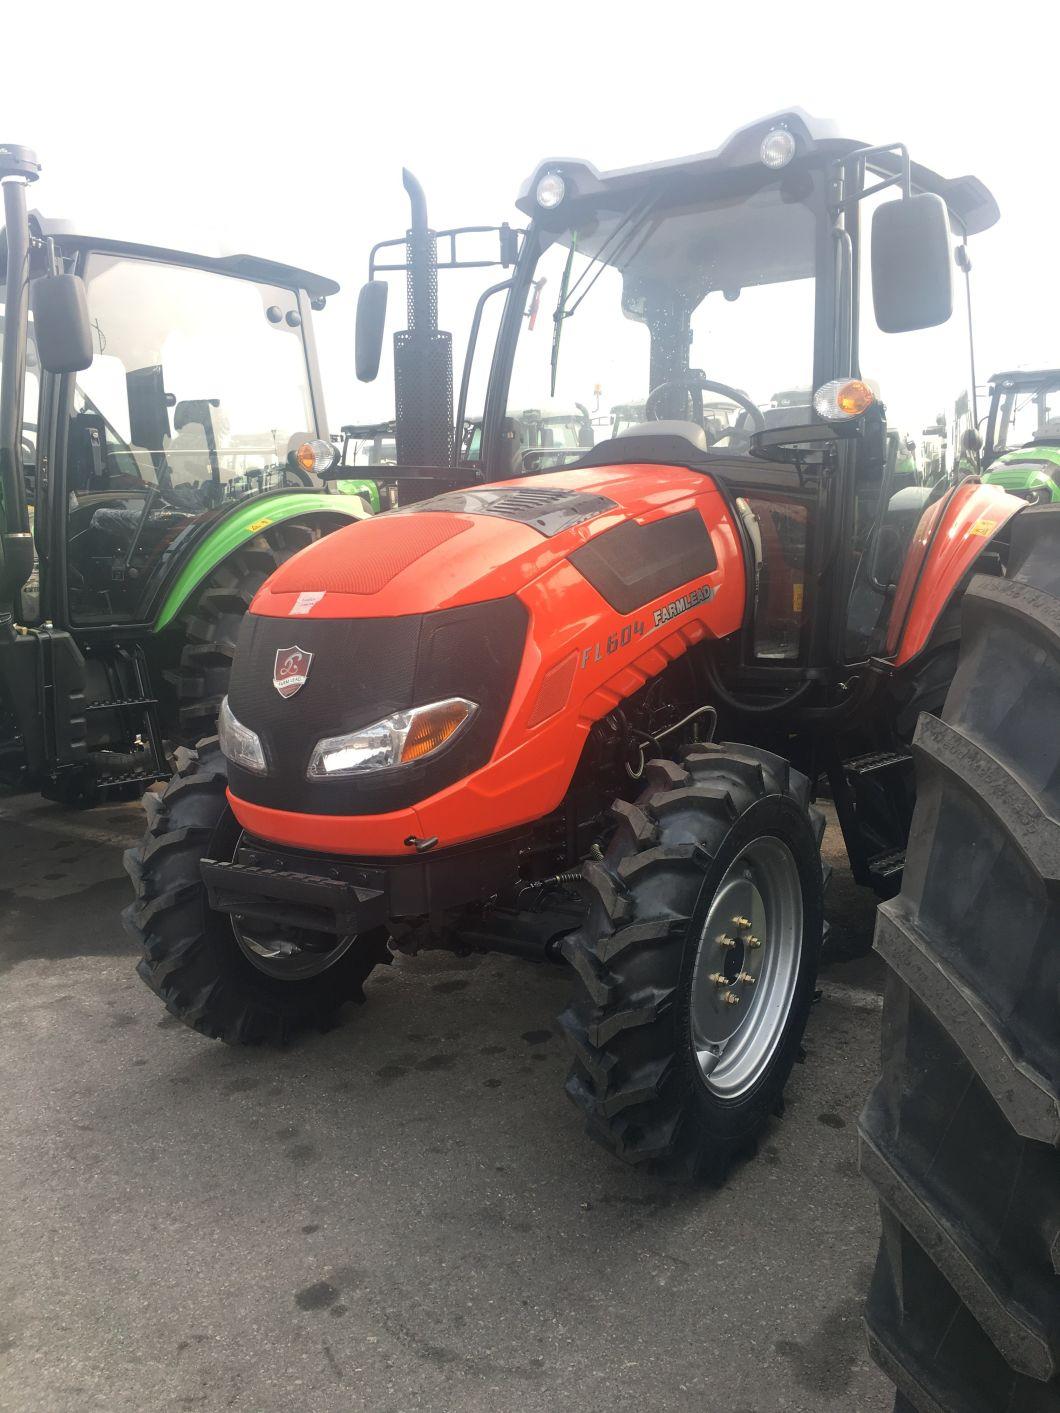 Deutz-Fahr 60CV Powerful Agricultural Farm Tractors with Turbo Plough Front End Loader and Farm Tractors